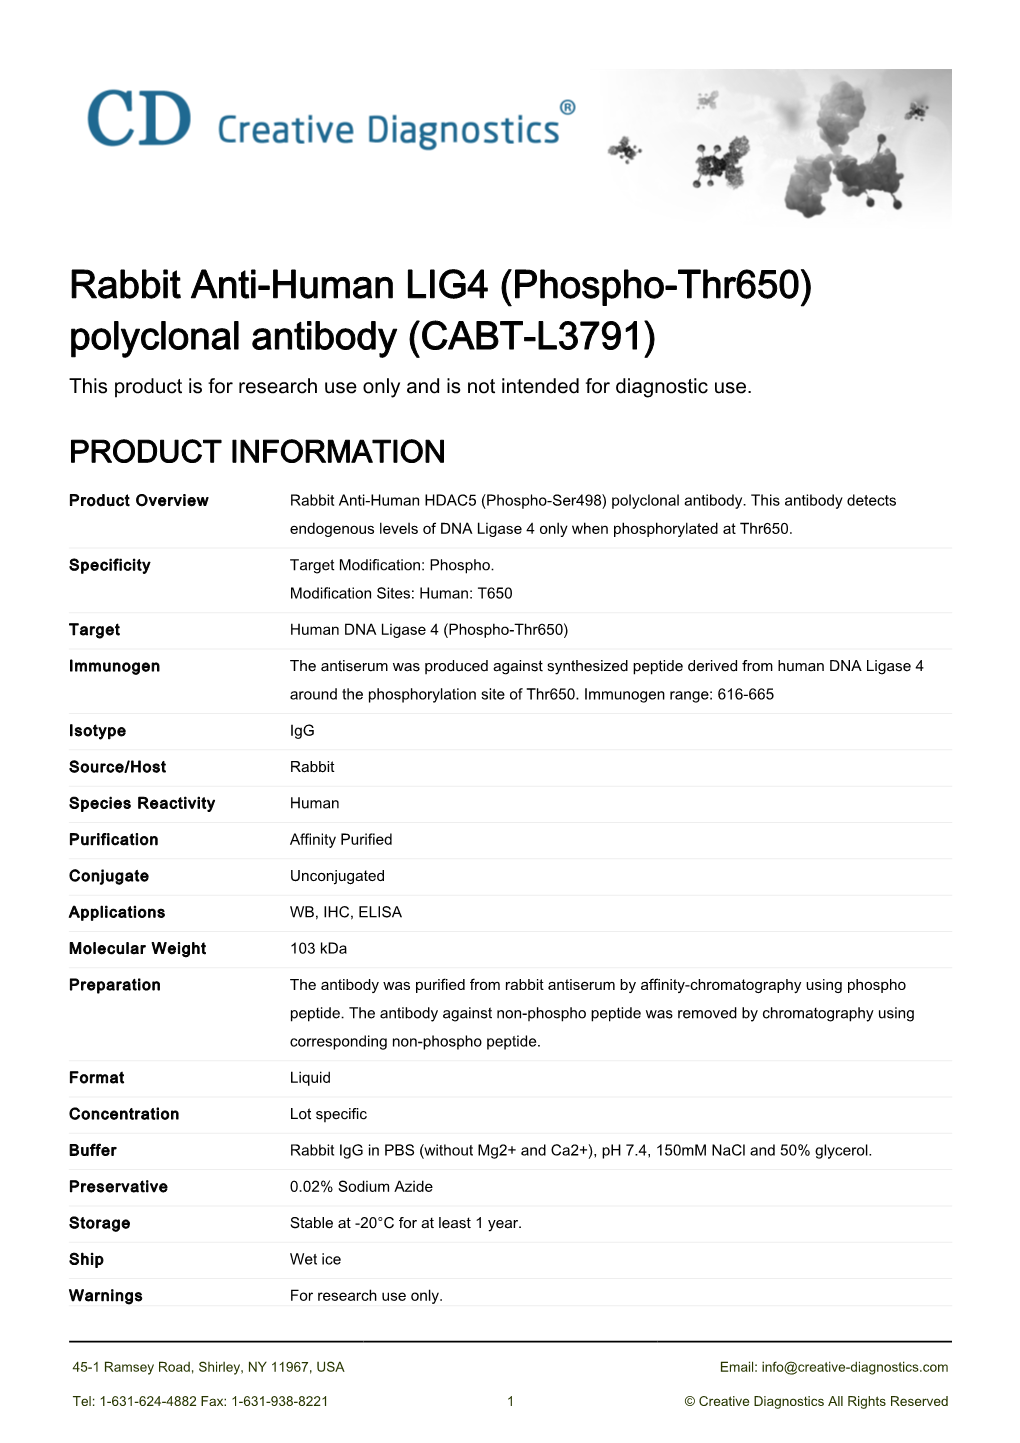 Rabbit Anti-Human LIG4 (Phospho-Thr650) Polyclonal Antibody (CABT-L3791) This Product Is for Research Use Only and Is Not Intended for Diagnostic Use